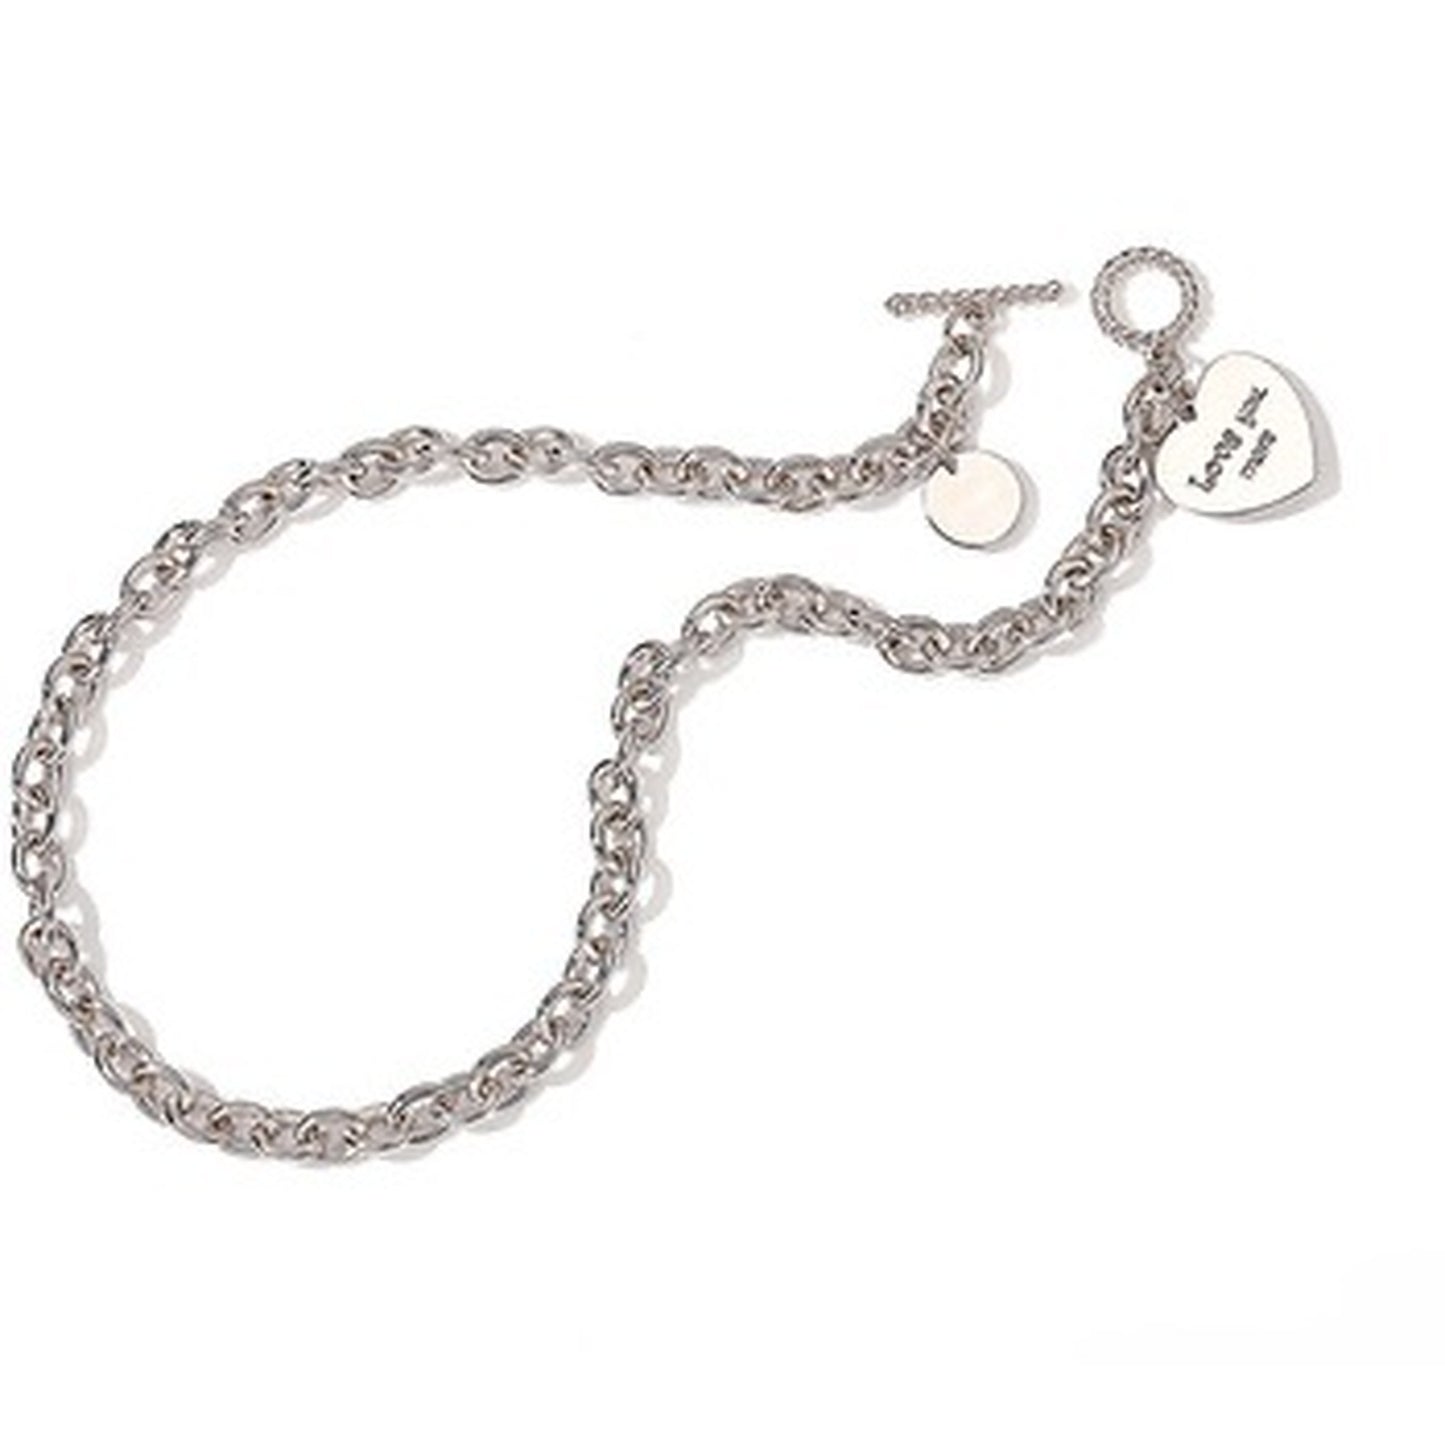 Chain charm necklace 5719